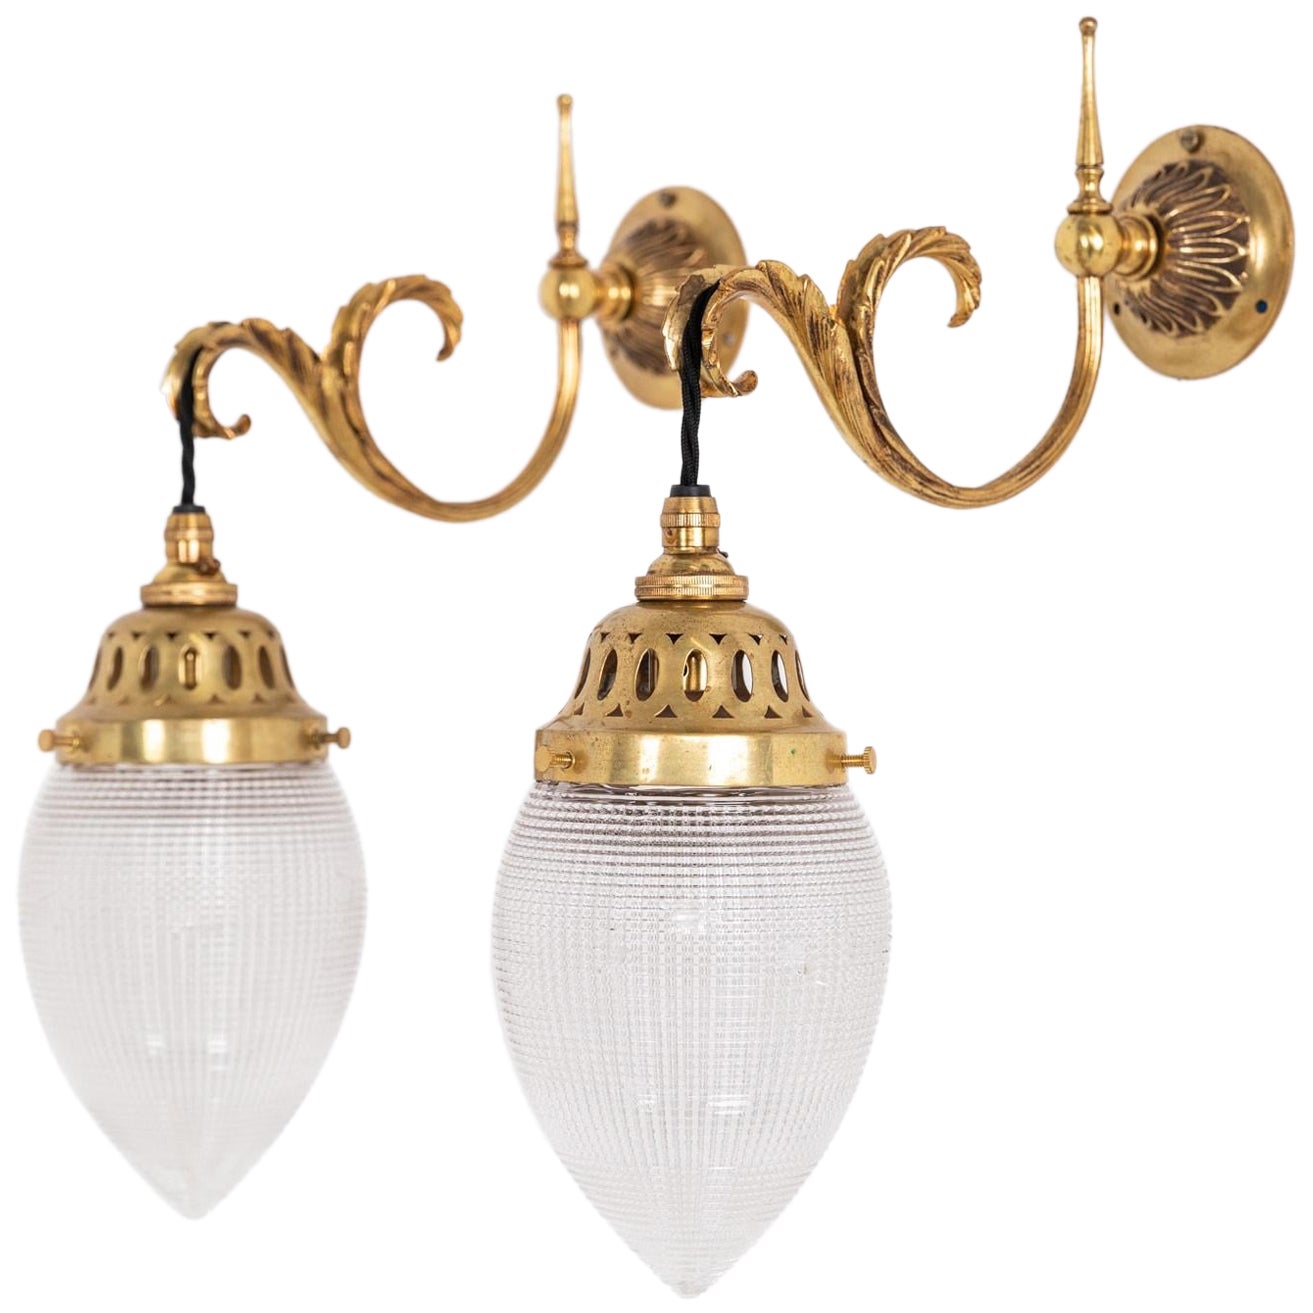 Pair of Antique Brass Osler / Holophane Wall Lamp Sconce Lights, c.1920 For Sale